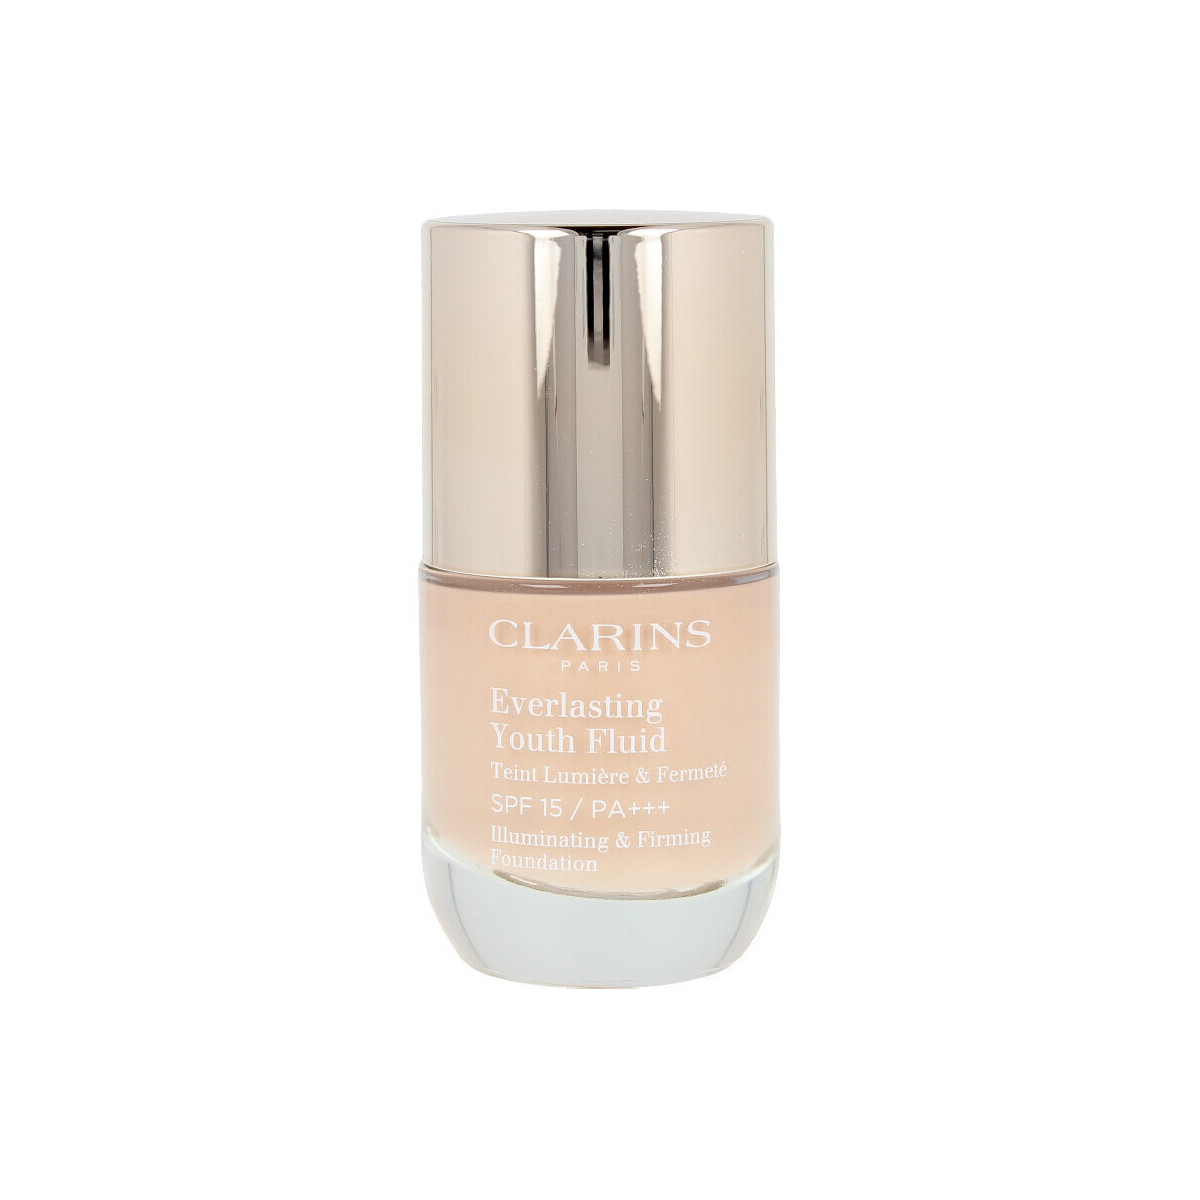 Beauty Make-up & Foundation  Clarins Everlasting Youth Fluid 107-beige 